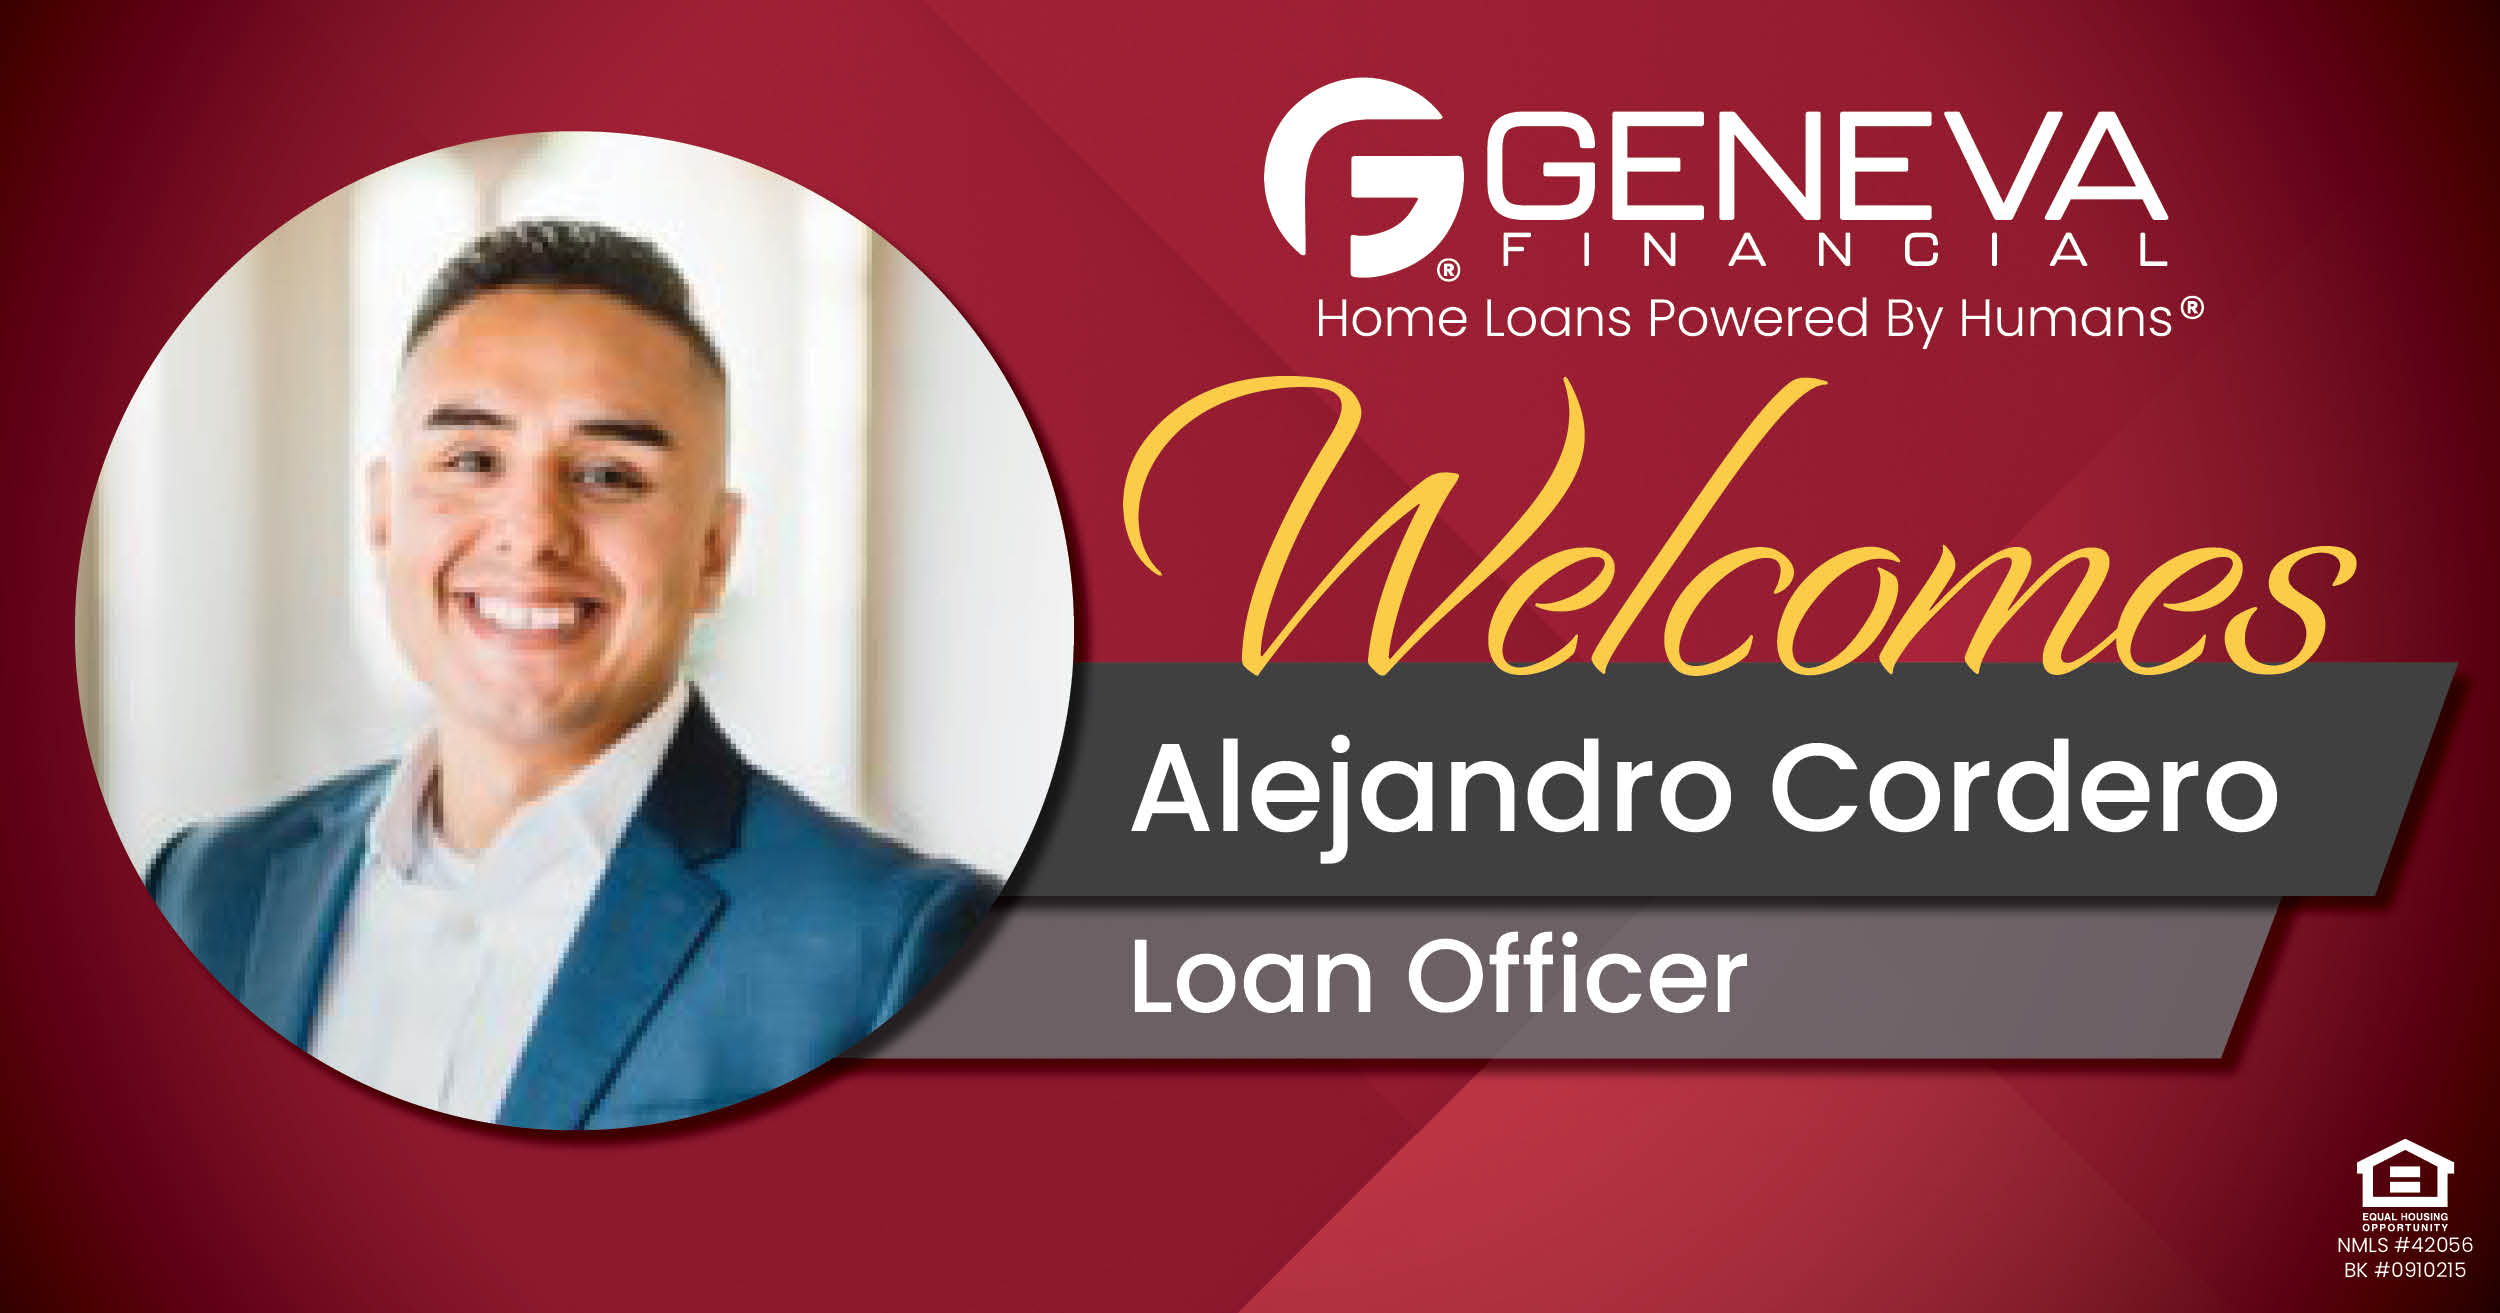 Geneva Financial Welcomes New Loan Officer Alejandro Cordero to Glendale, Arizona– Home Loans Powered by Humans®.